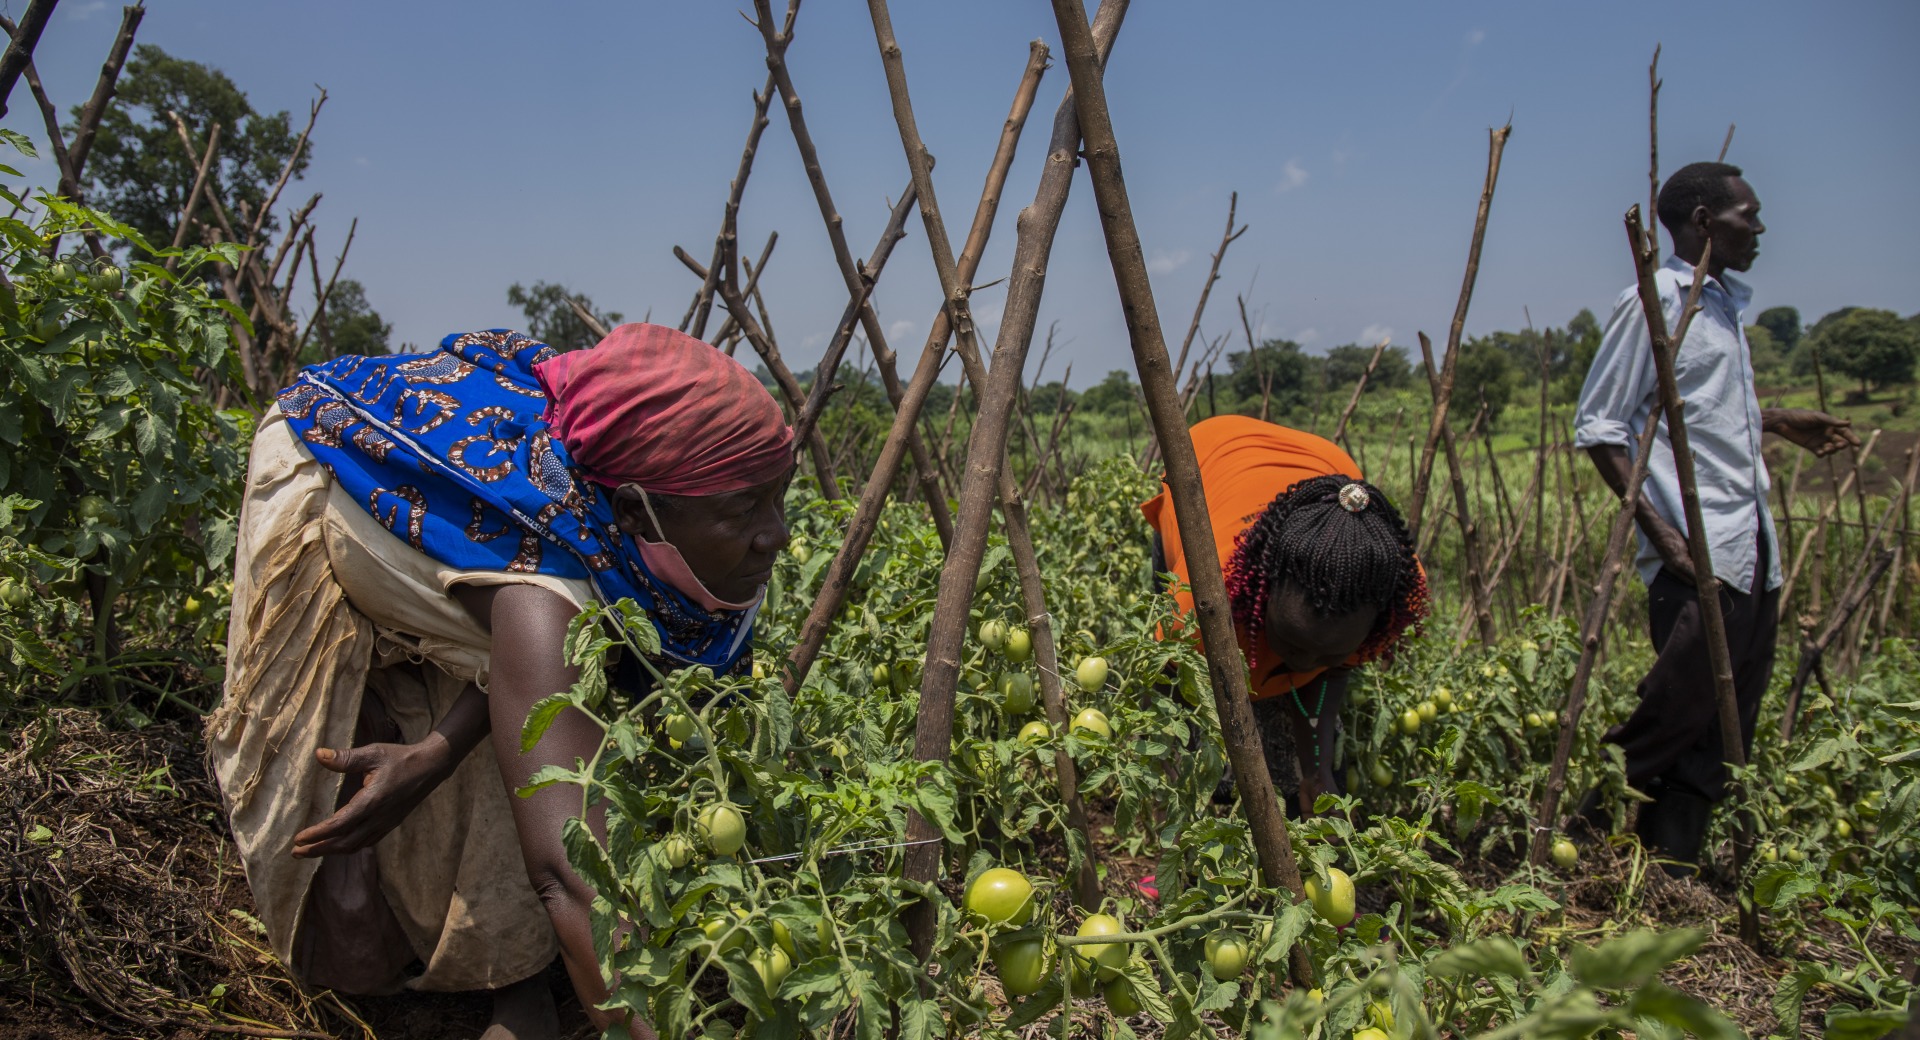 In Uganda, Action Against Hunger is helping refugees and host communities make the most of their land and existing resources to grow a variety of nutritious crops.